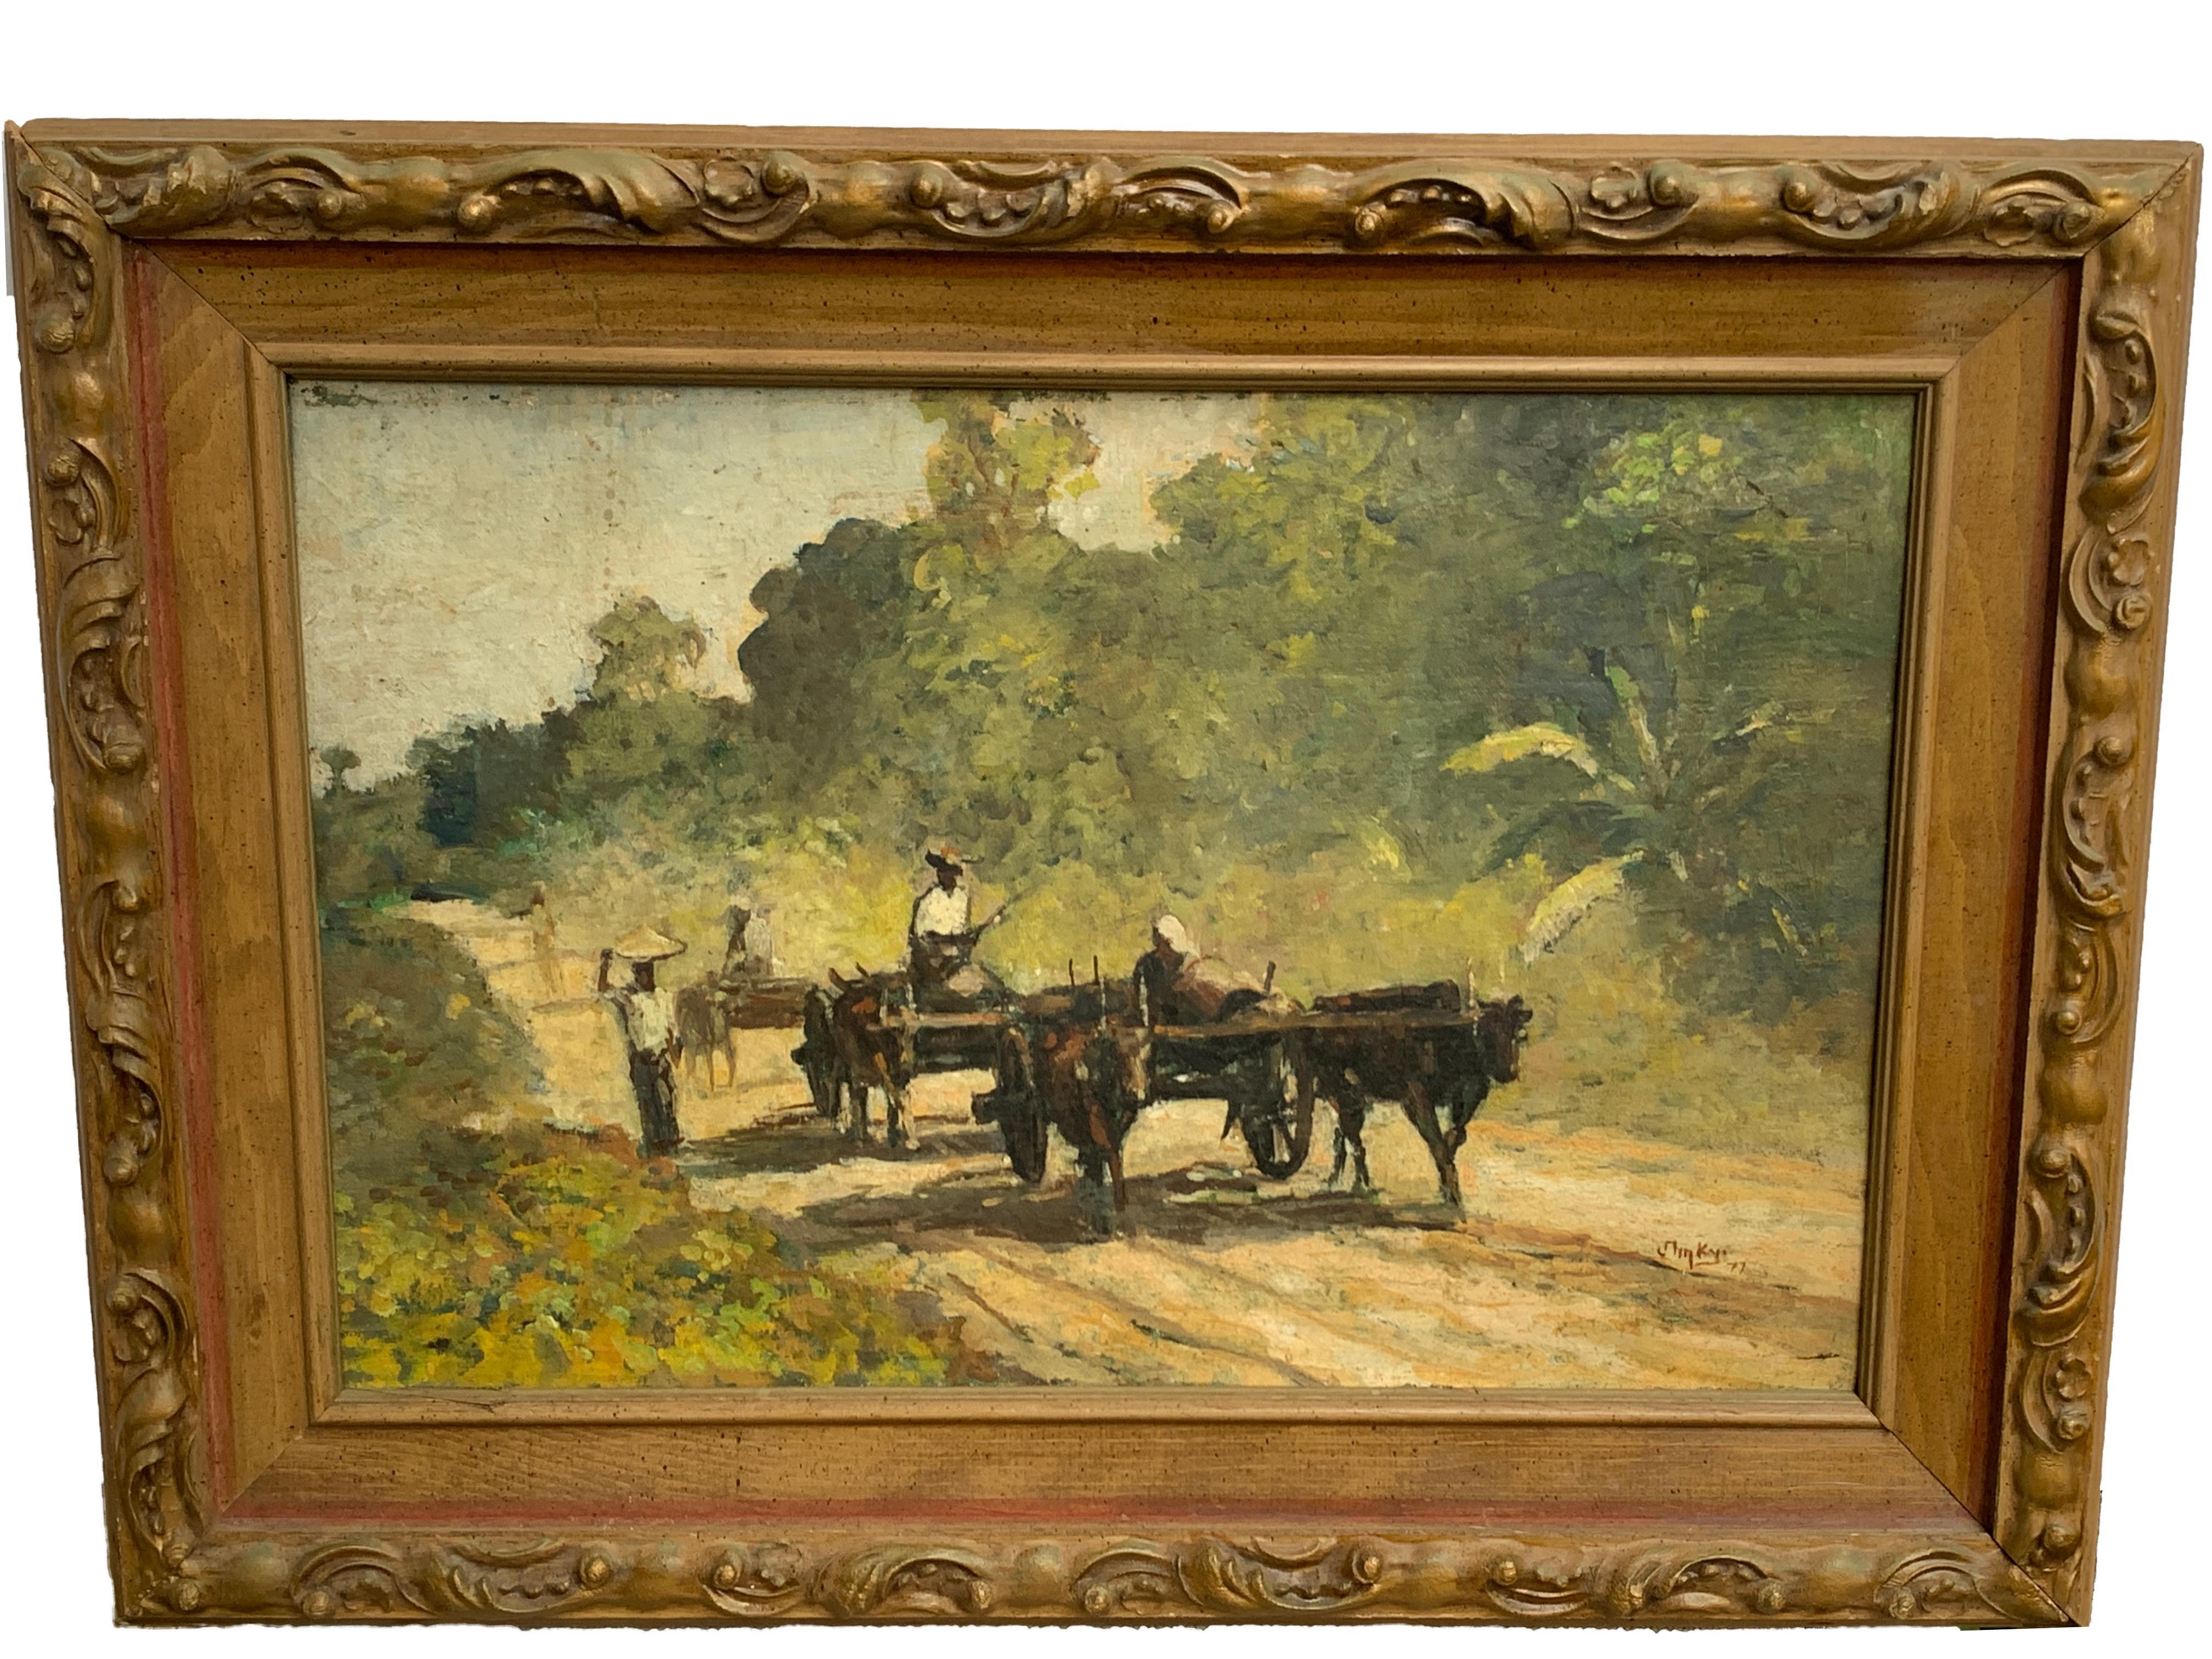 Mid-century Chinese landscape painting, farmers with oxen, signed Lower right 'Jin Ky '71'
Oil on board 12